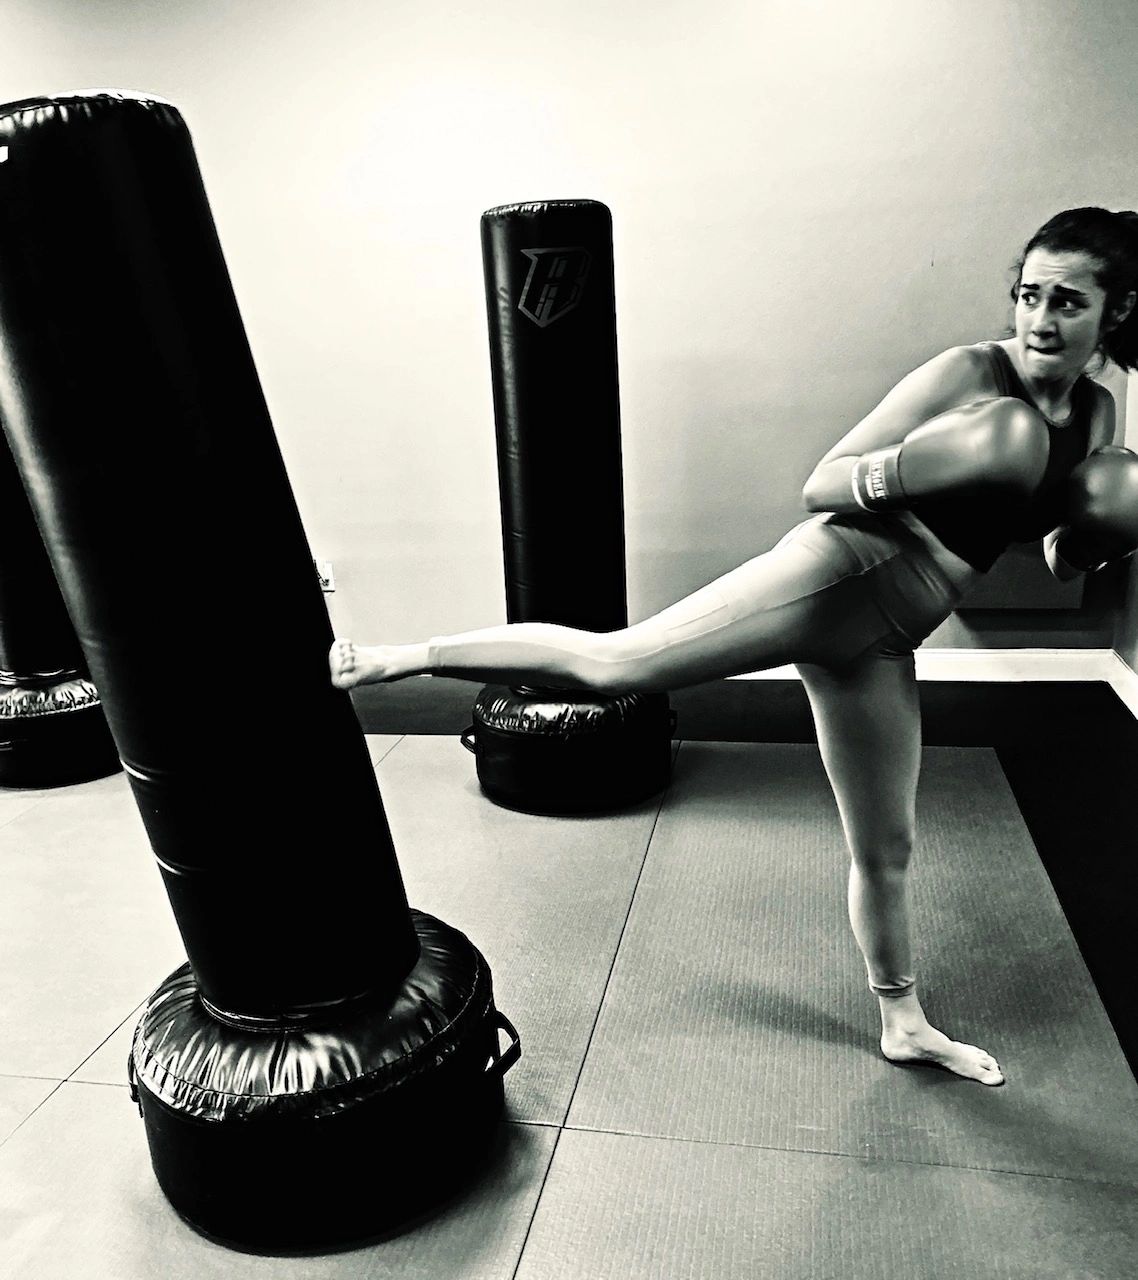 5 Kickboxing Benefits That Will Encourage You to Hit the Gym